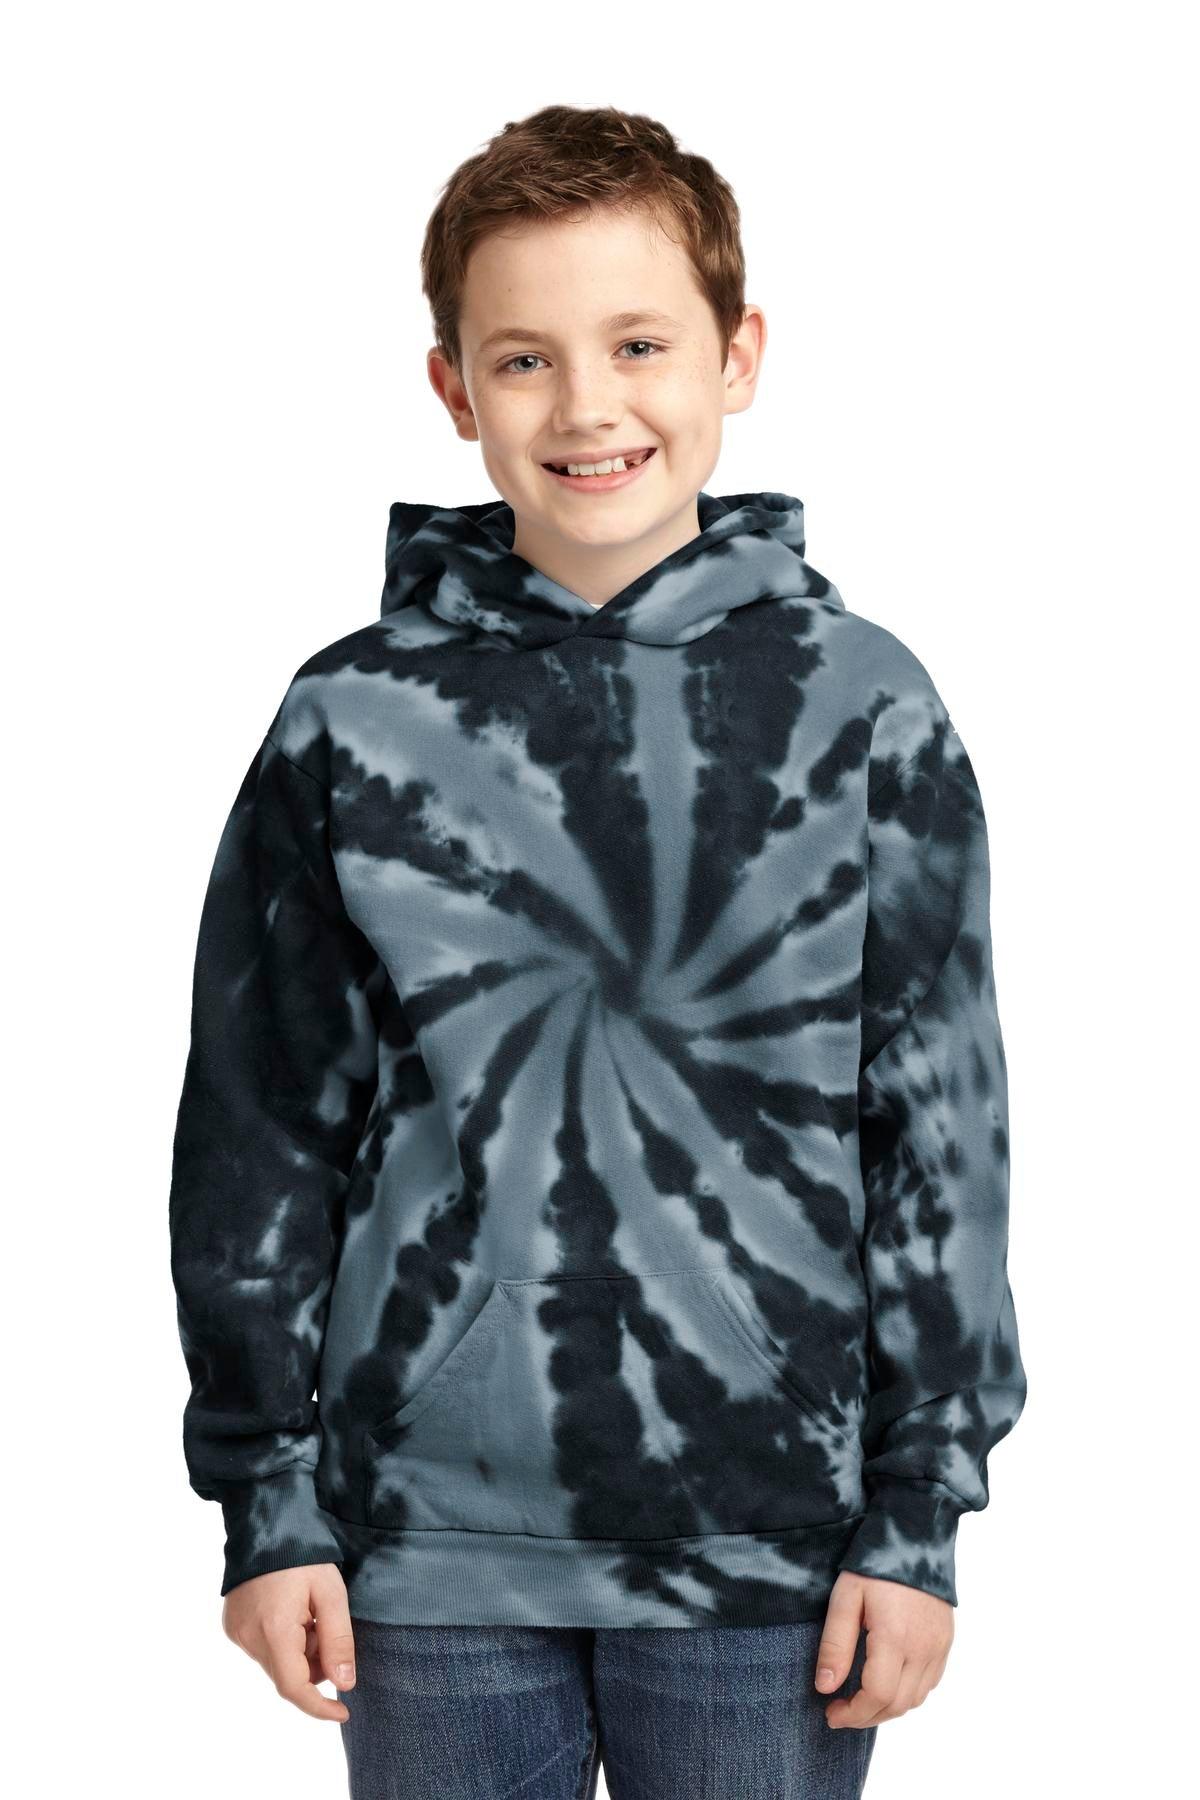 Port & Company Youth Tie-Dye Pullover Hooded Sweatshirt. PC146Y - Dresses Max